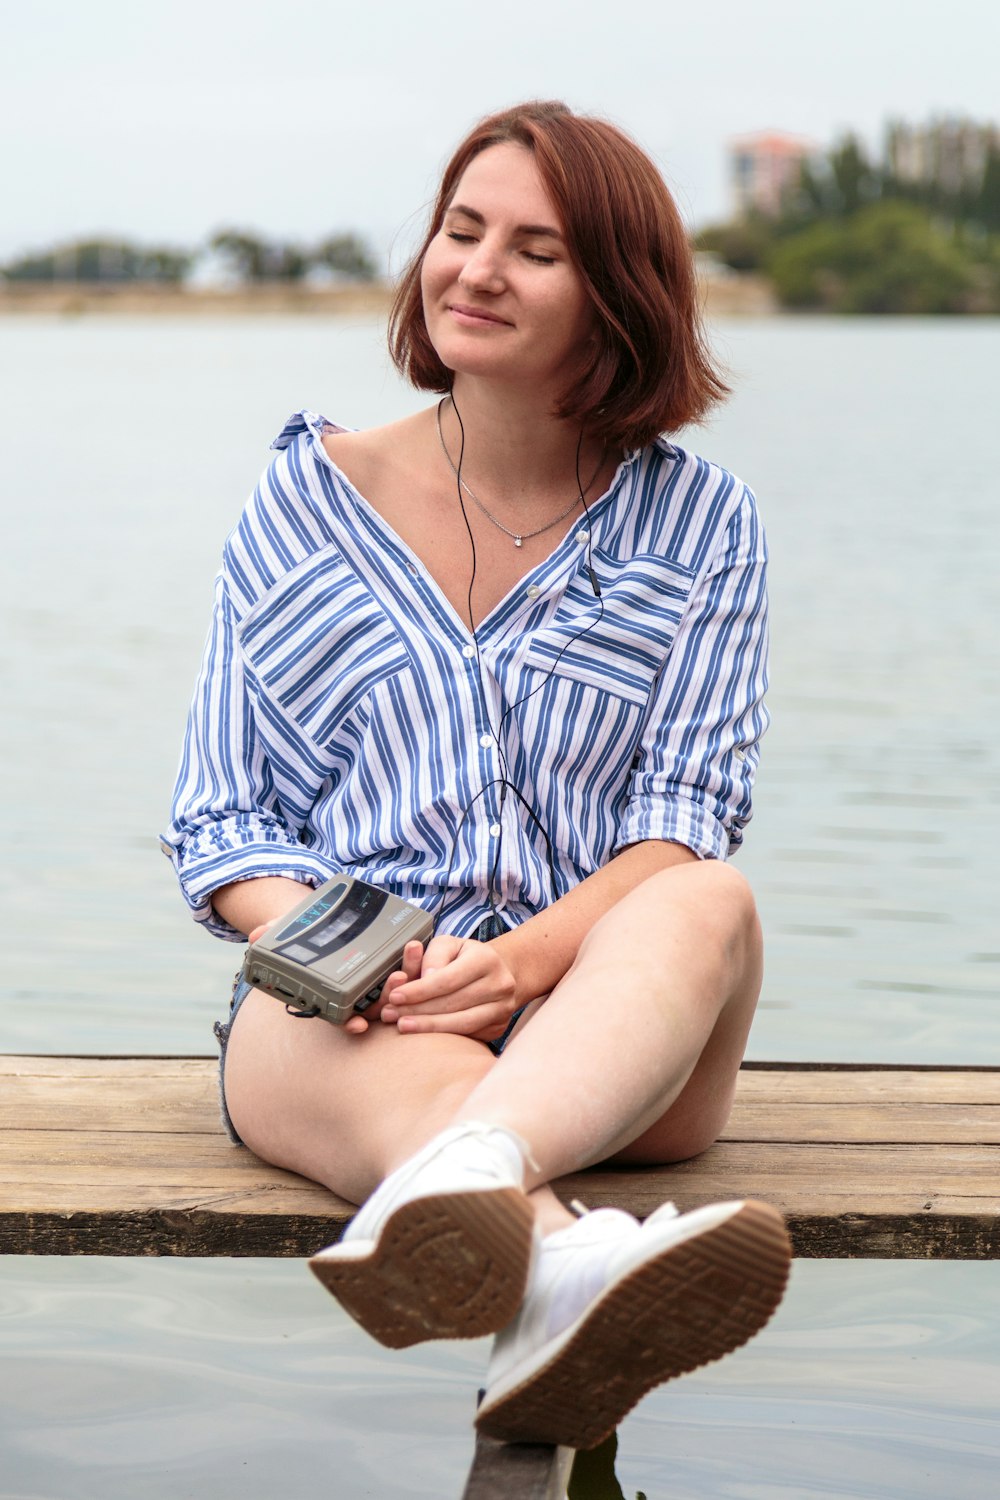 woman in blue and white striped long sleeve shirt sitting on brown wooden dock during daytime